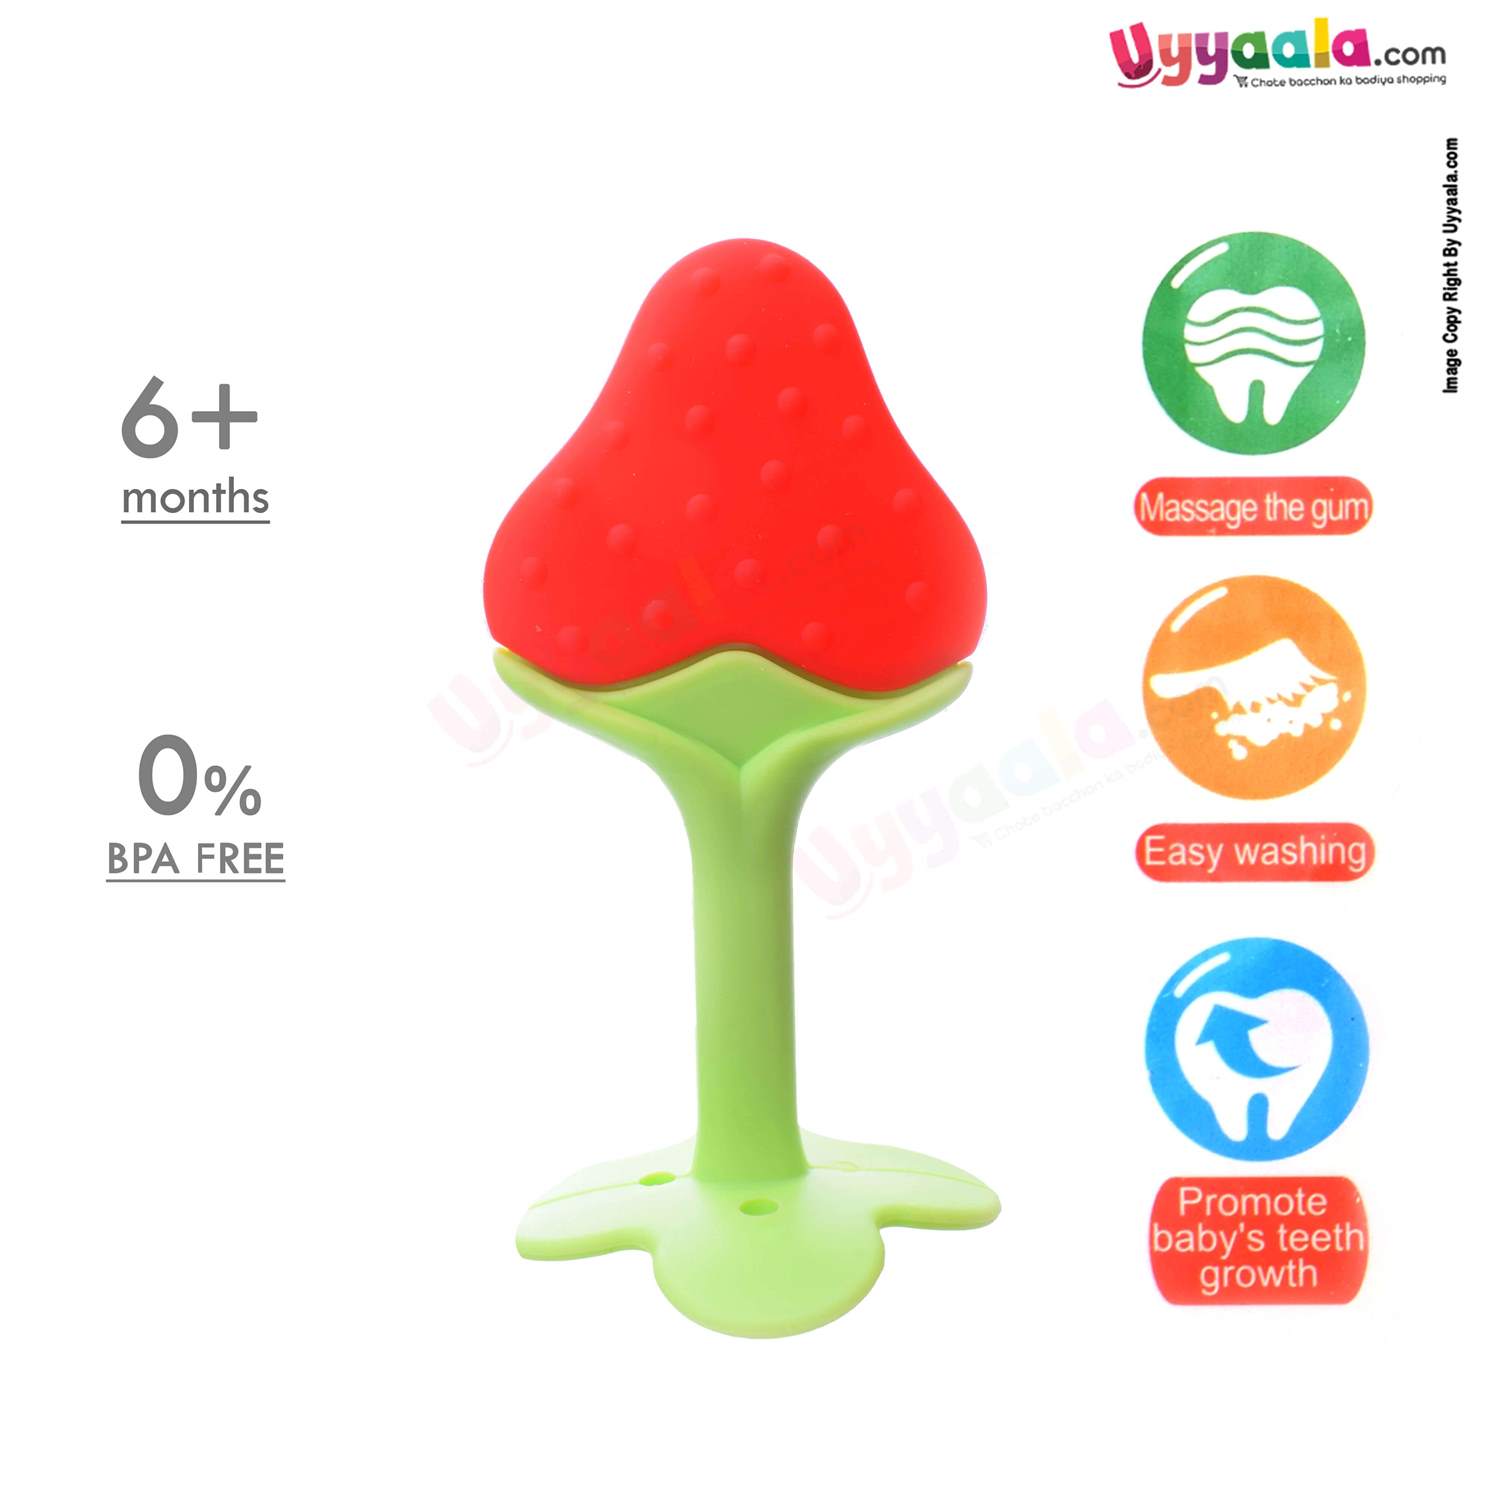 MUMLOVE  Fruits Silicone Baby Teether 6+m Age - Red, Green